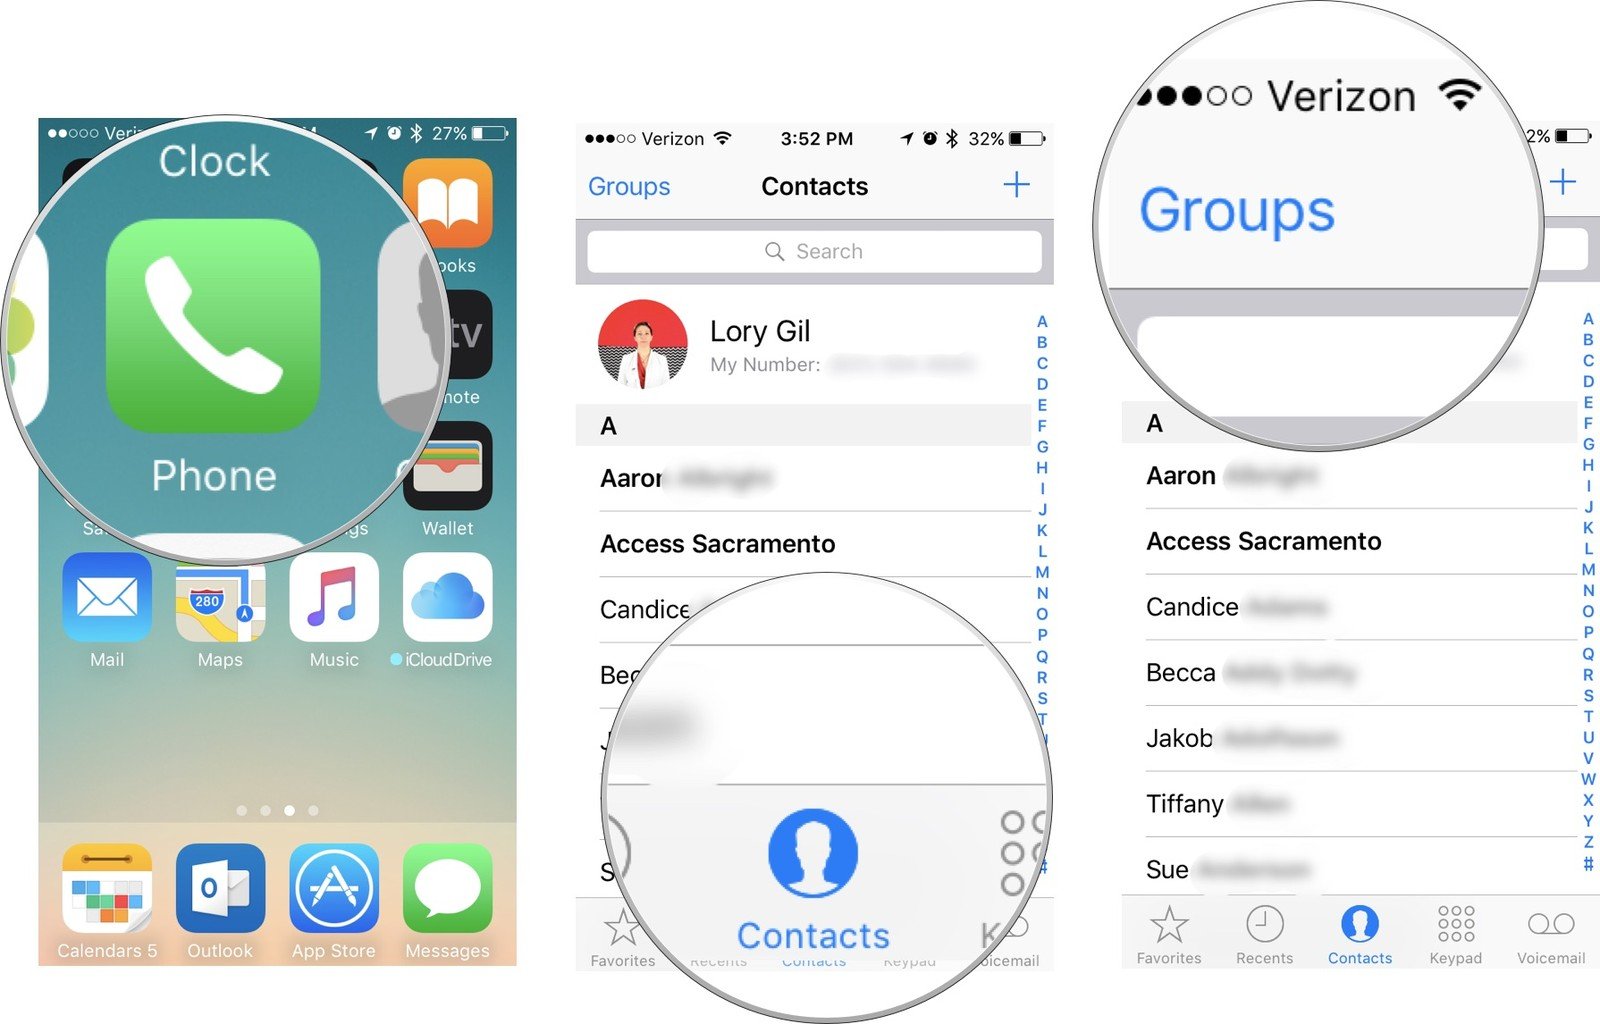 How to get lost iCloud contacts back on your iPhone